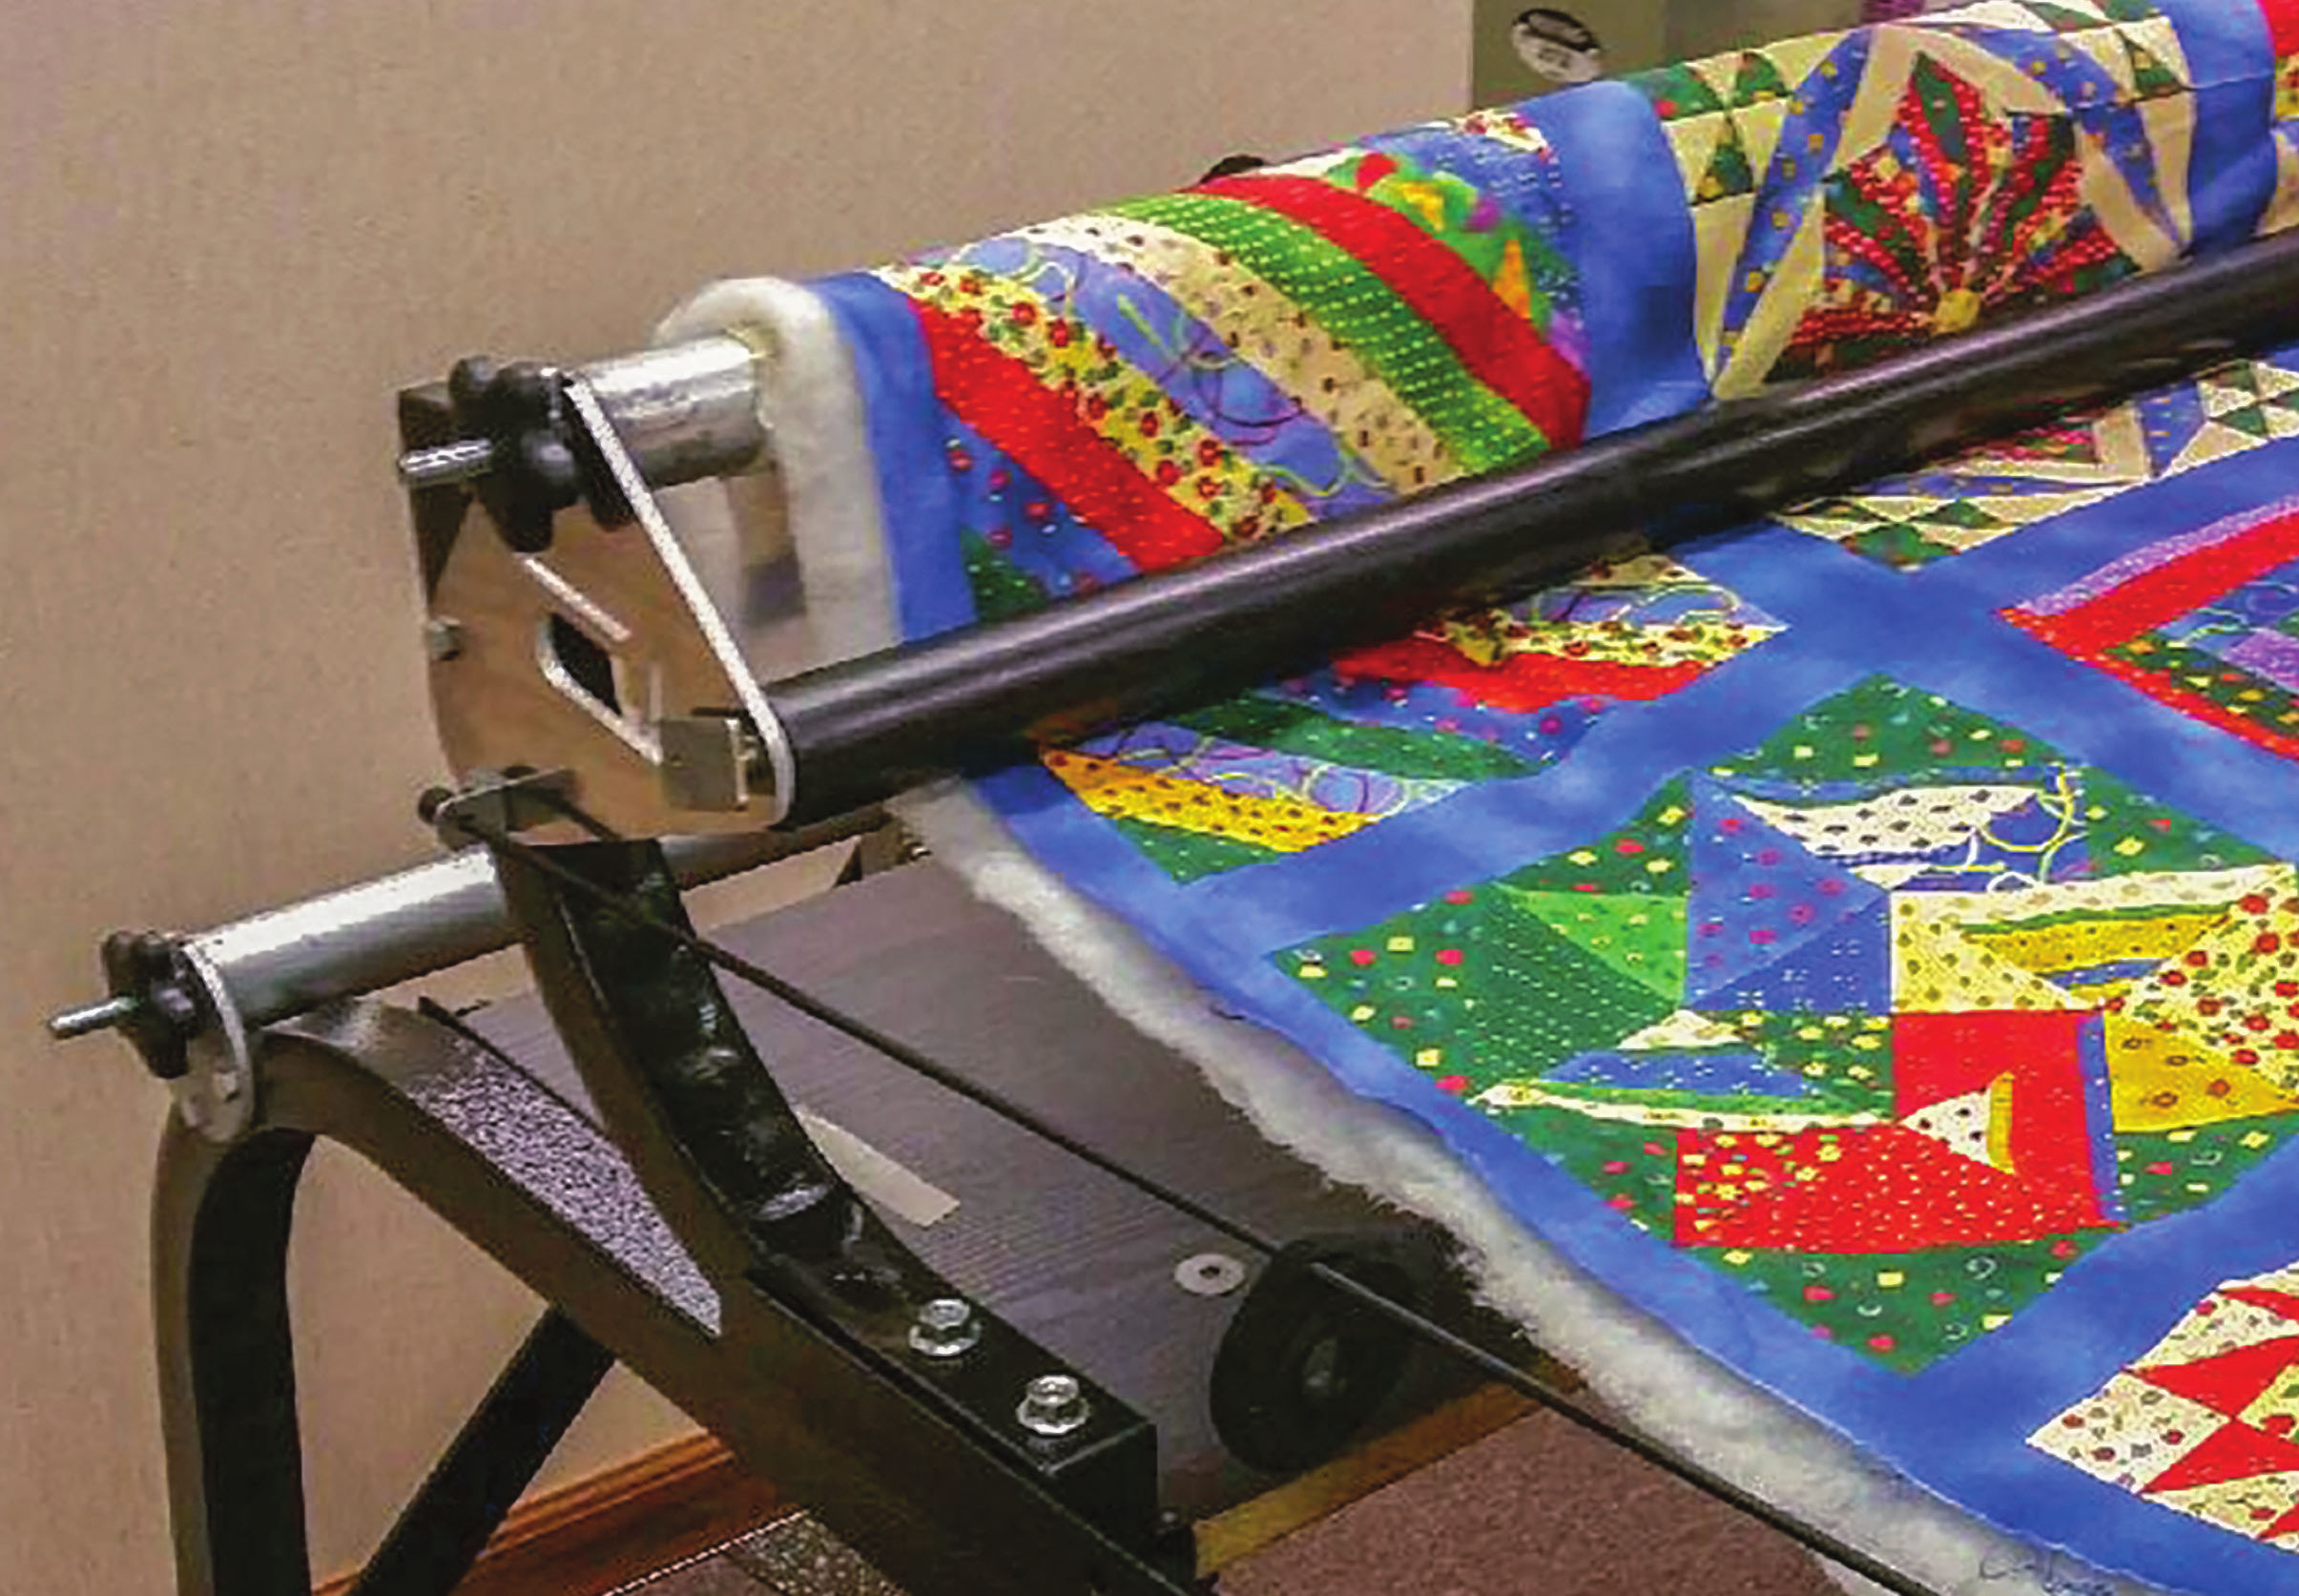 Nolting Commercial Frame - Nolting Longarm Quilting Machines